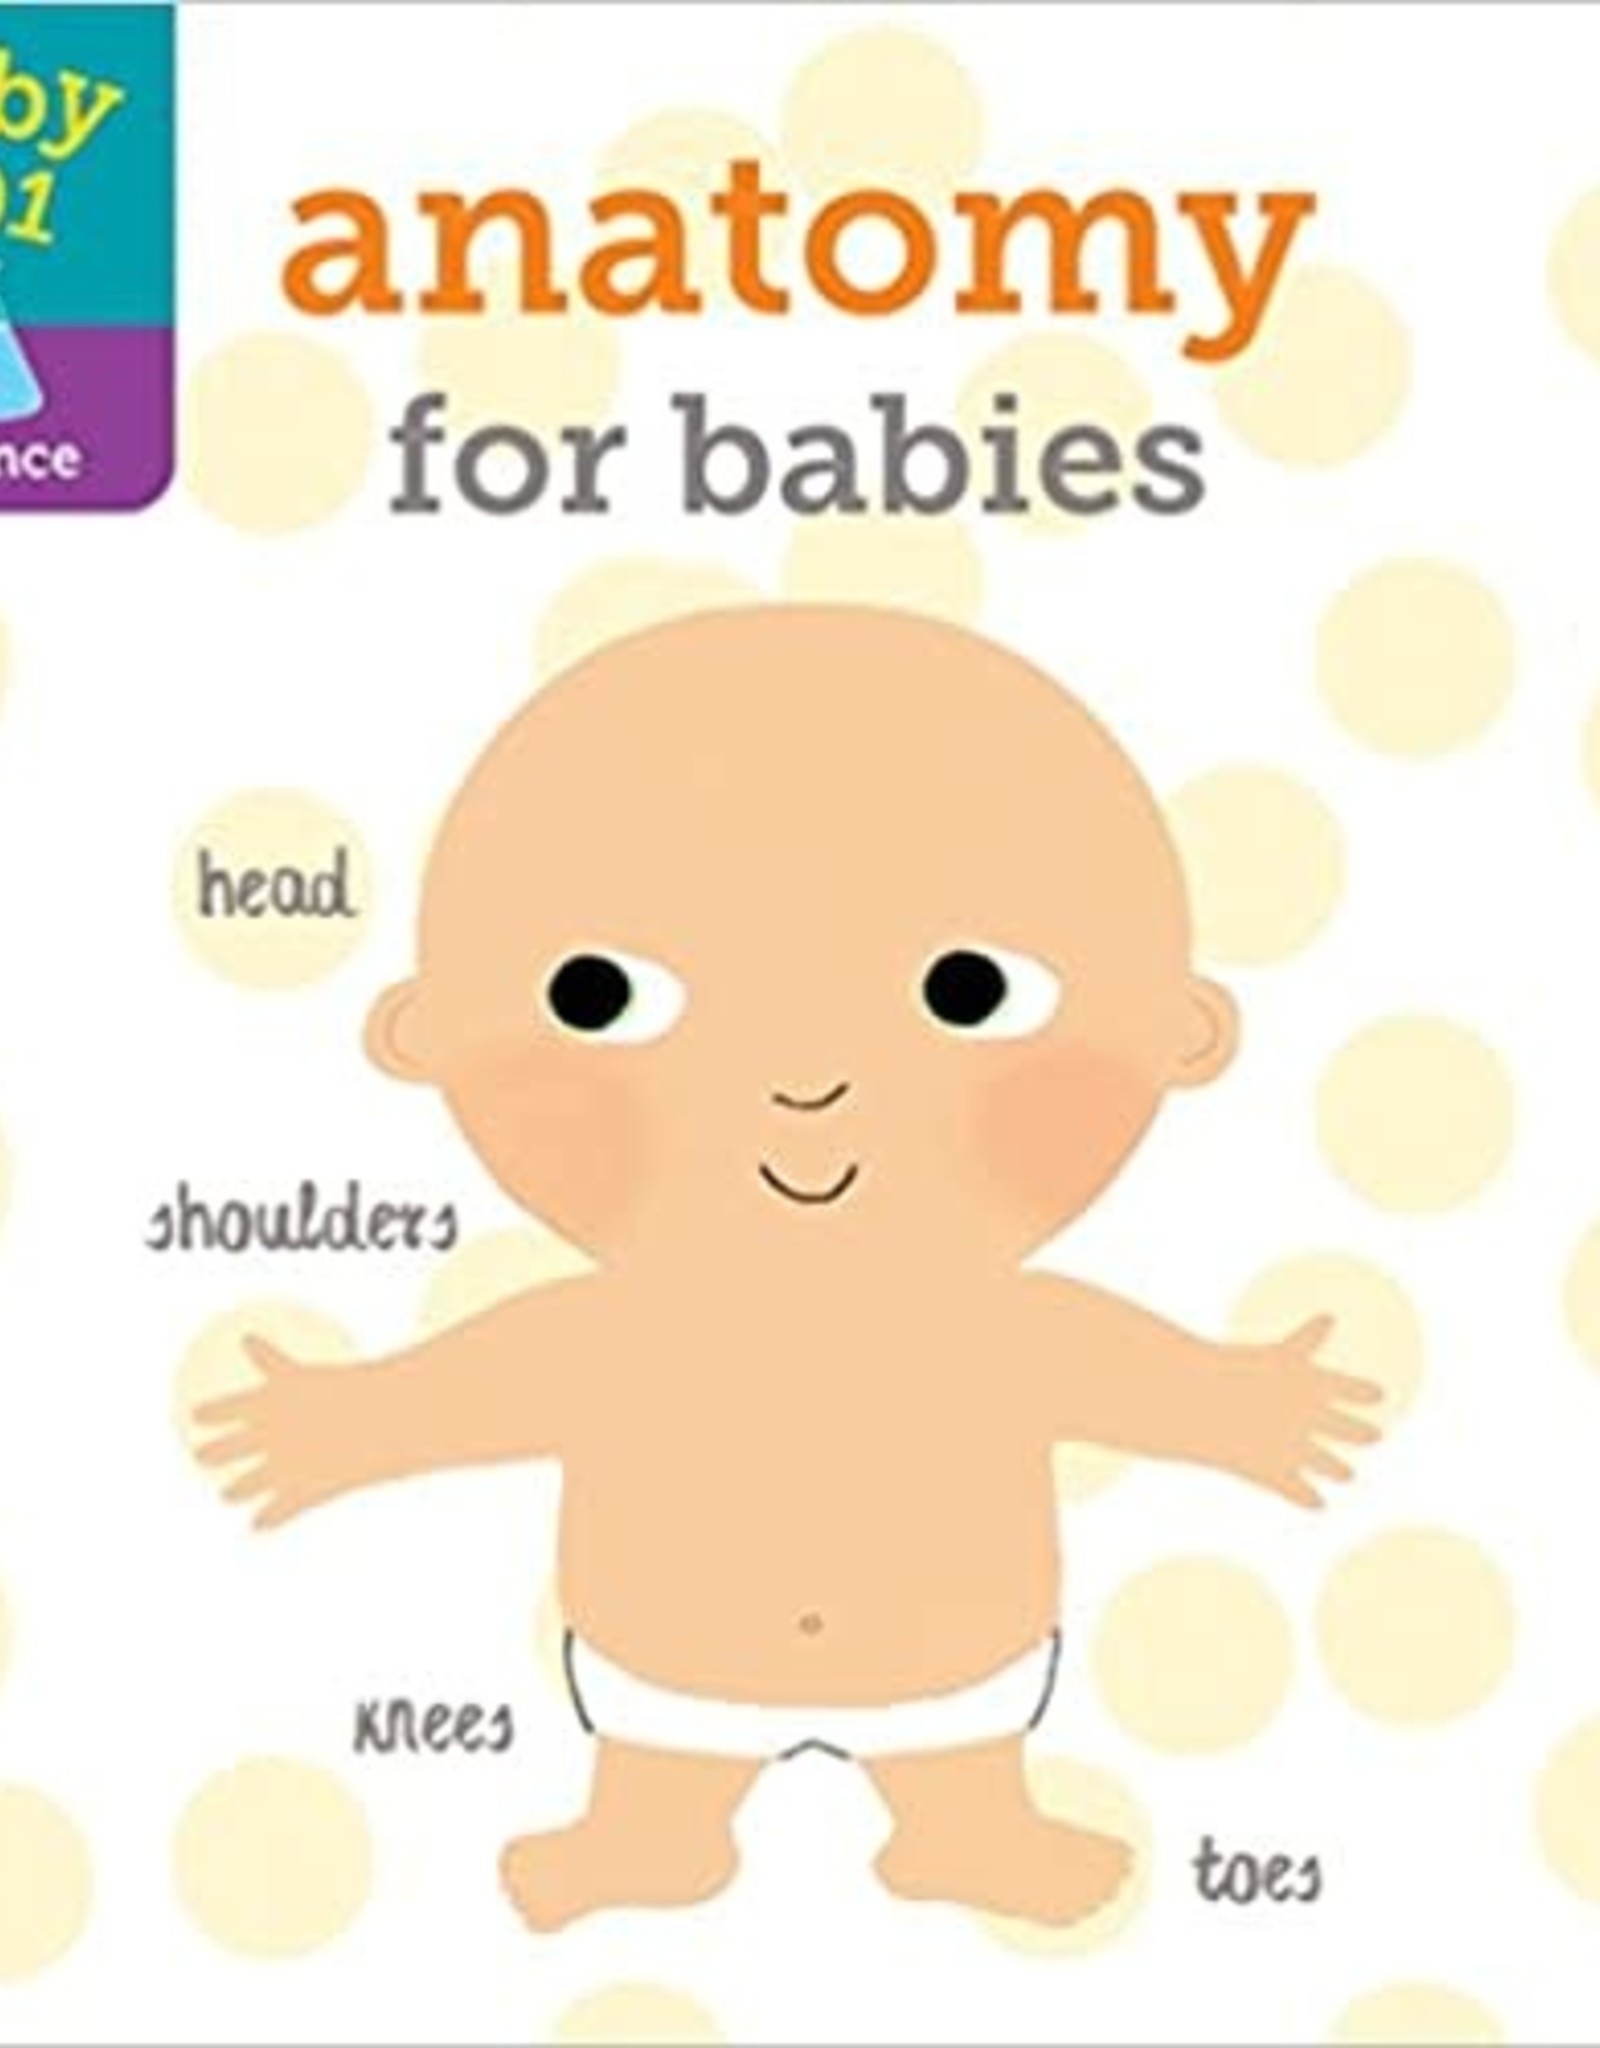 Baby 101 Anatomy for Babies Book